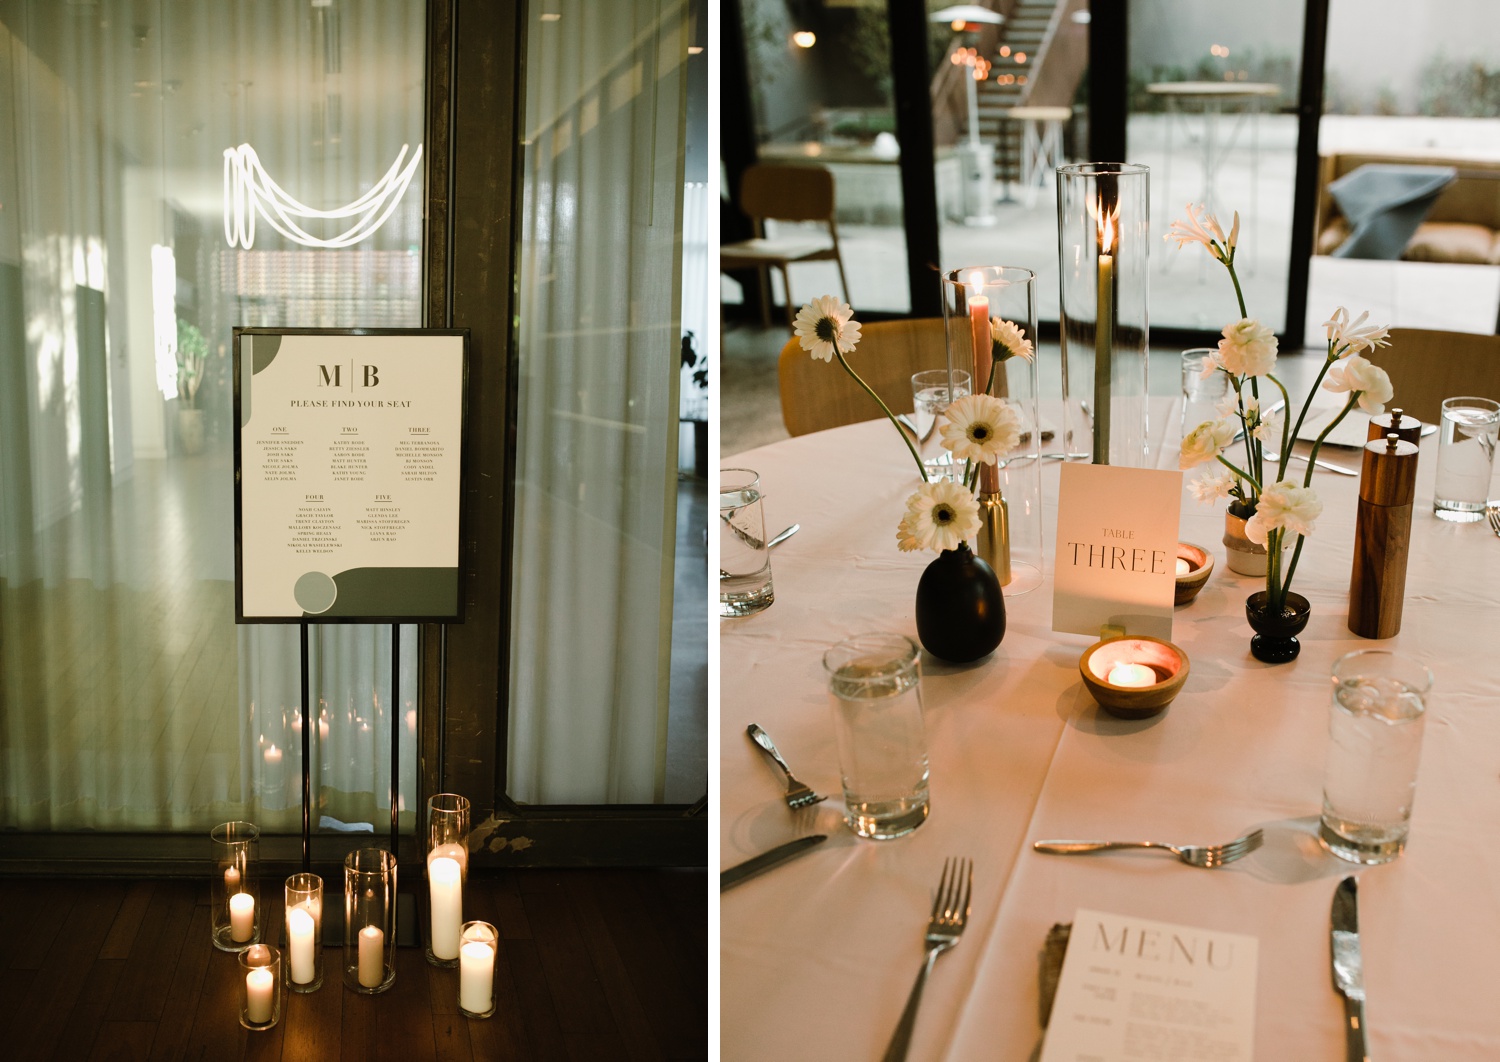 White linens, anemone flowers, and tealight candles for a winter wedding reception